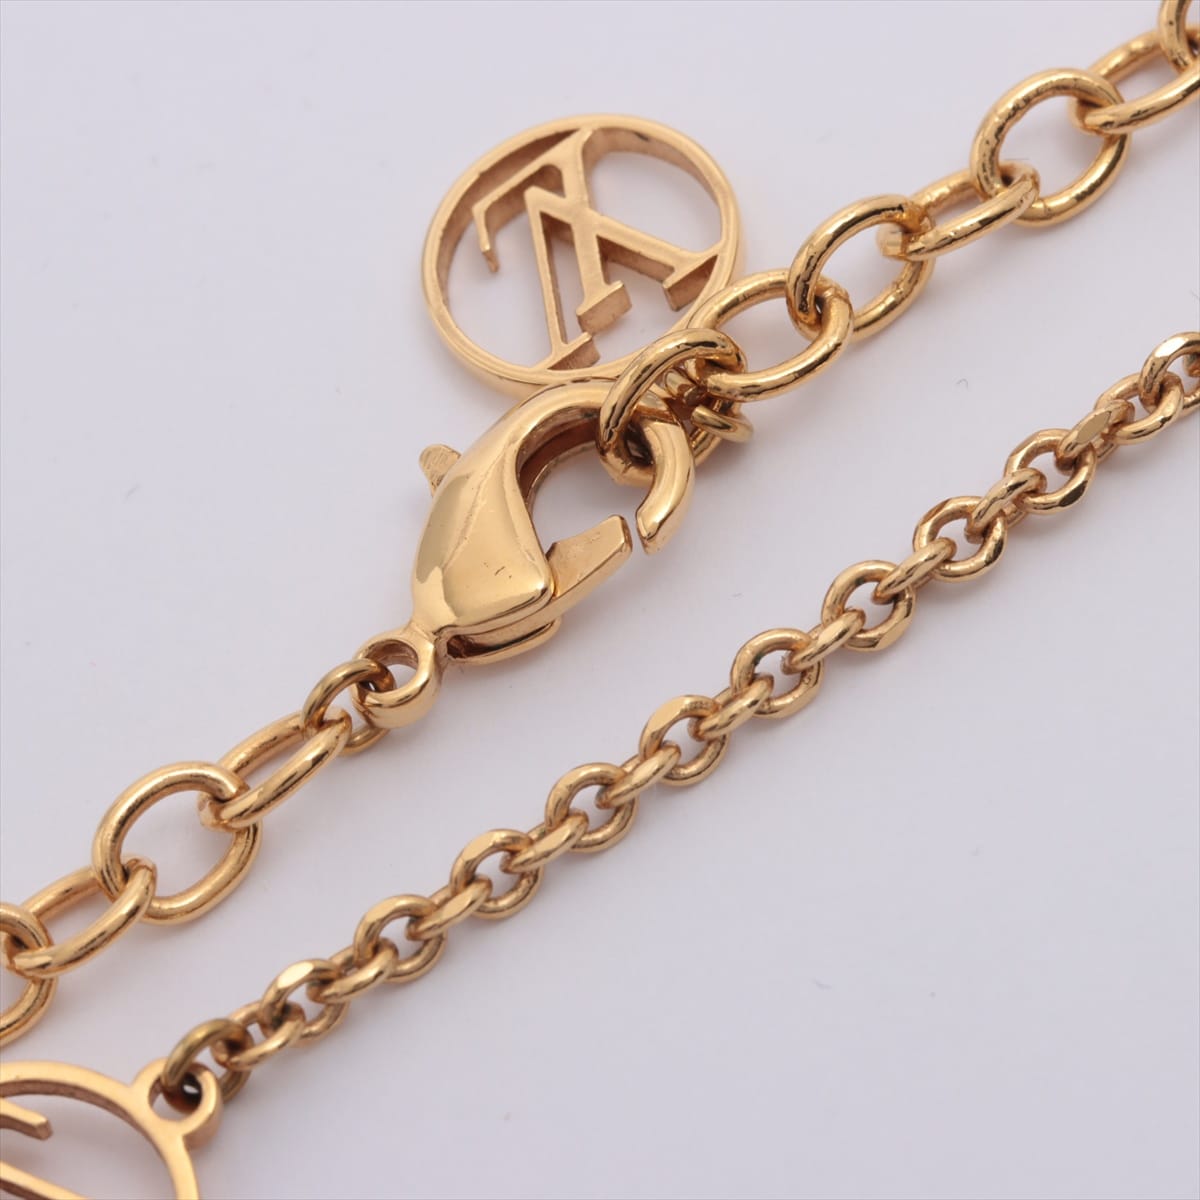 Louis Vuitton M64855 Collier Blooming OB1129 Necklace GP Gold